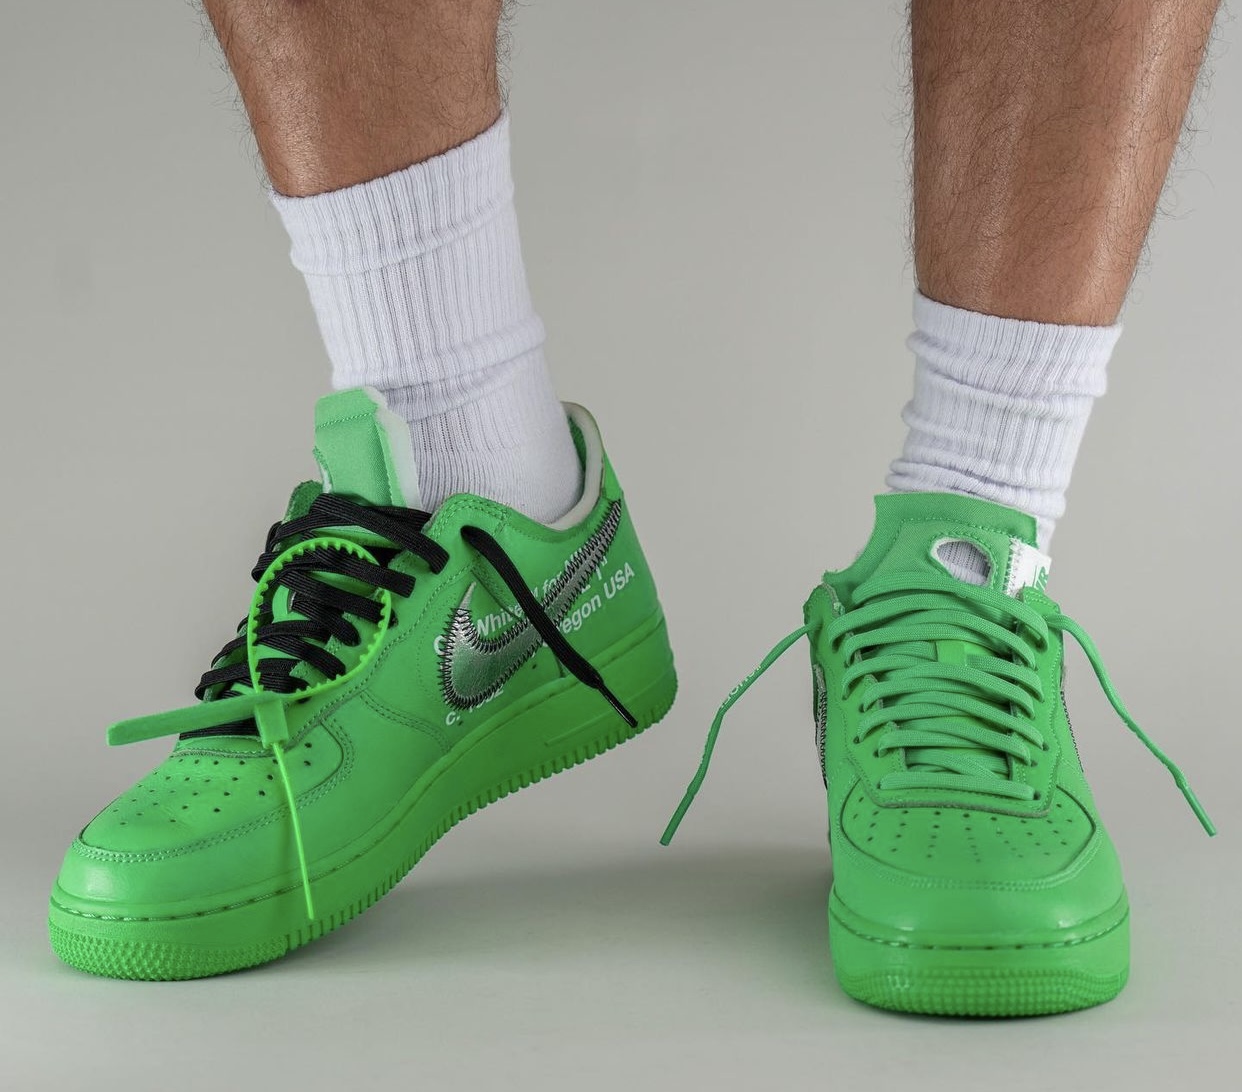 Off-White Nike Air Force 1 Low Light Verde Spark On-Feet DX1419-300 Data di rilascio